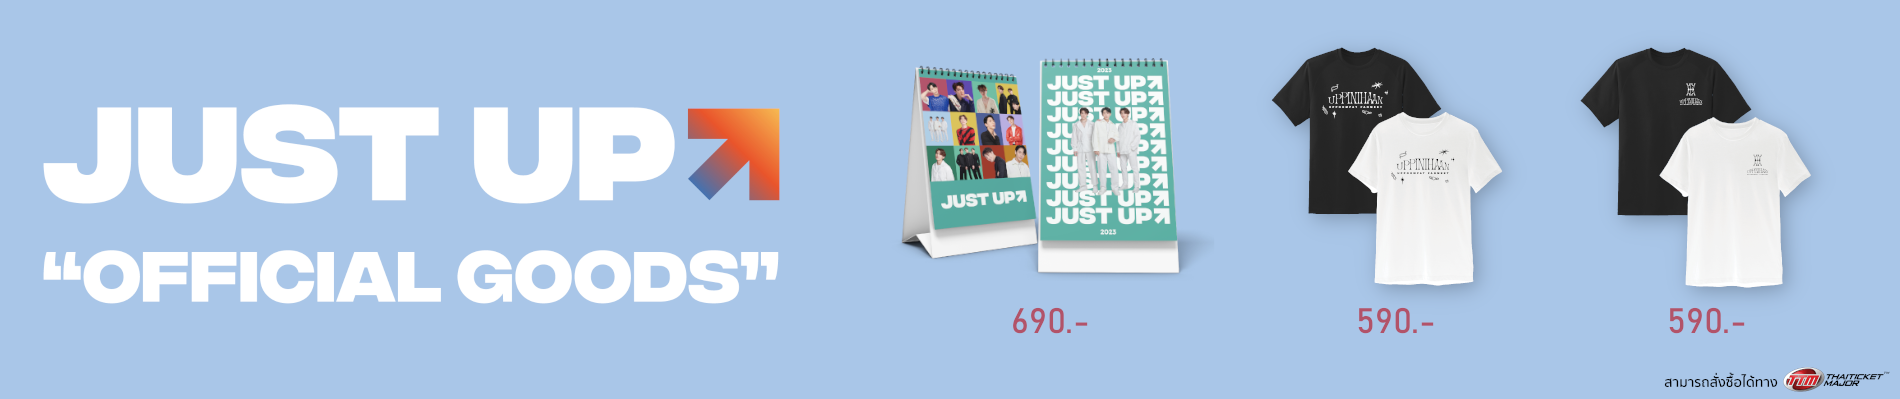 JUSTUP OFFICIAL GOODS